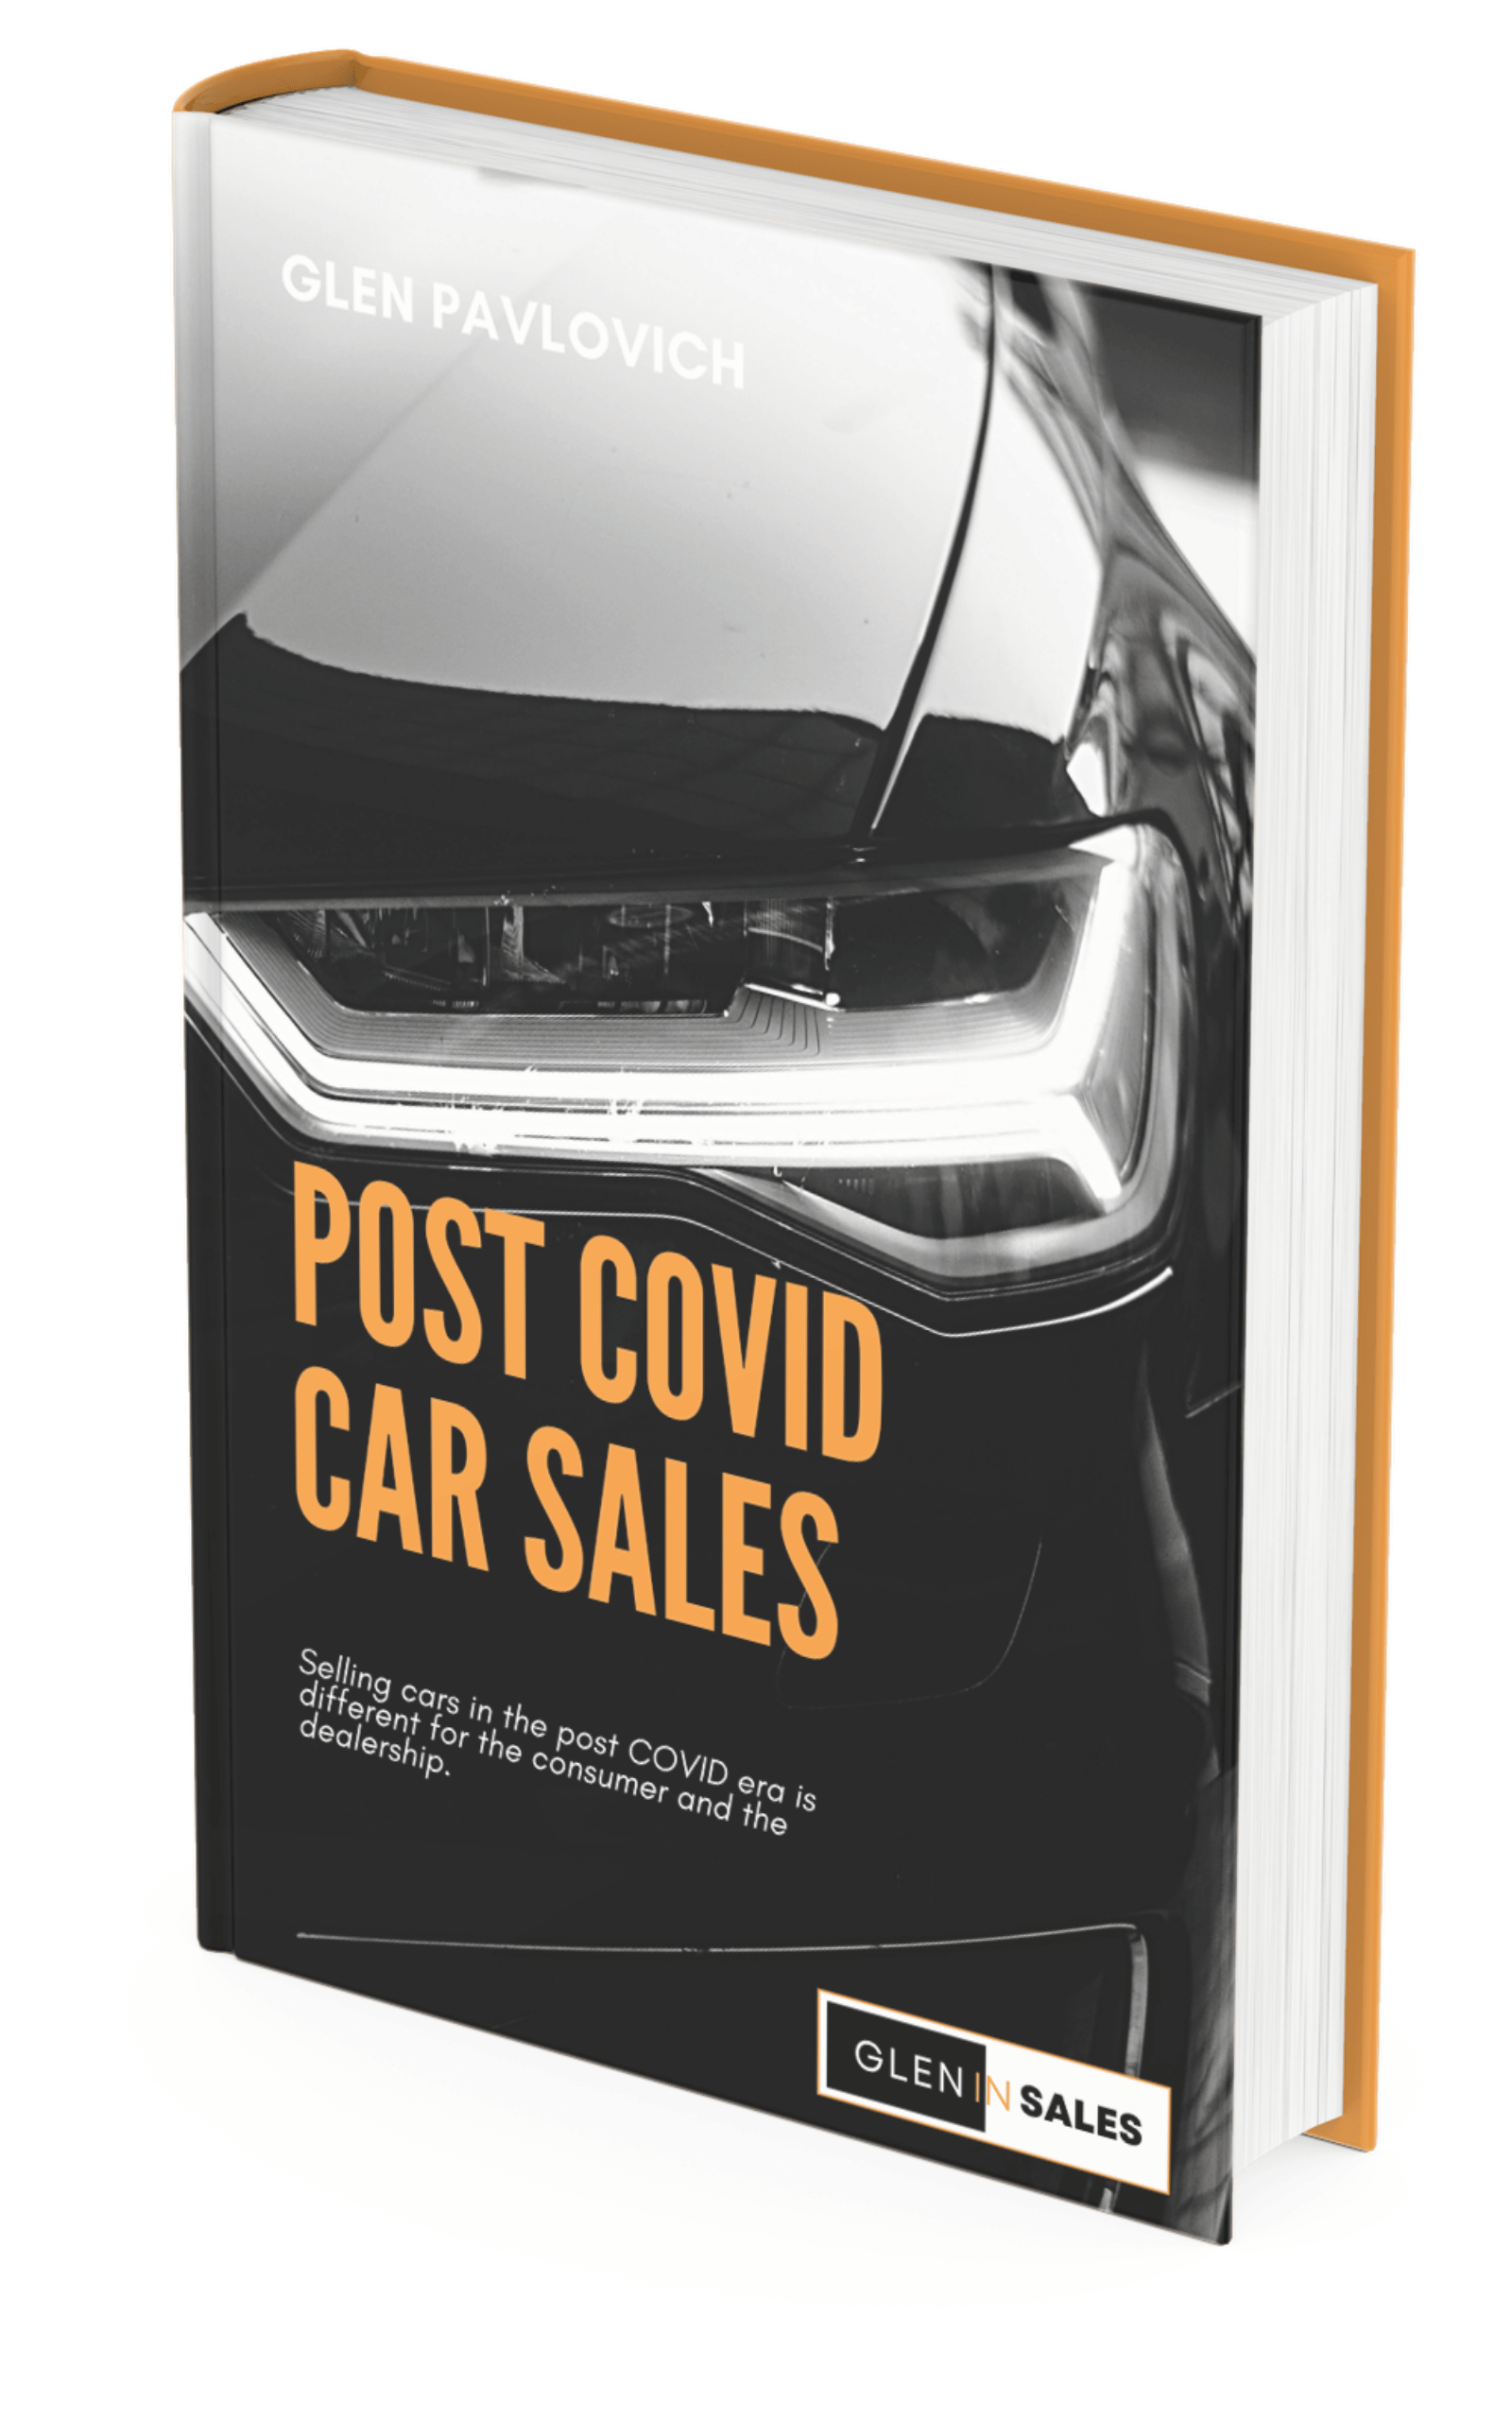 Post COVID Car Sales - A Guide For Selling Cars In The Post-COVID Era - Buy now on Amazon